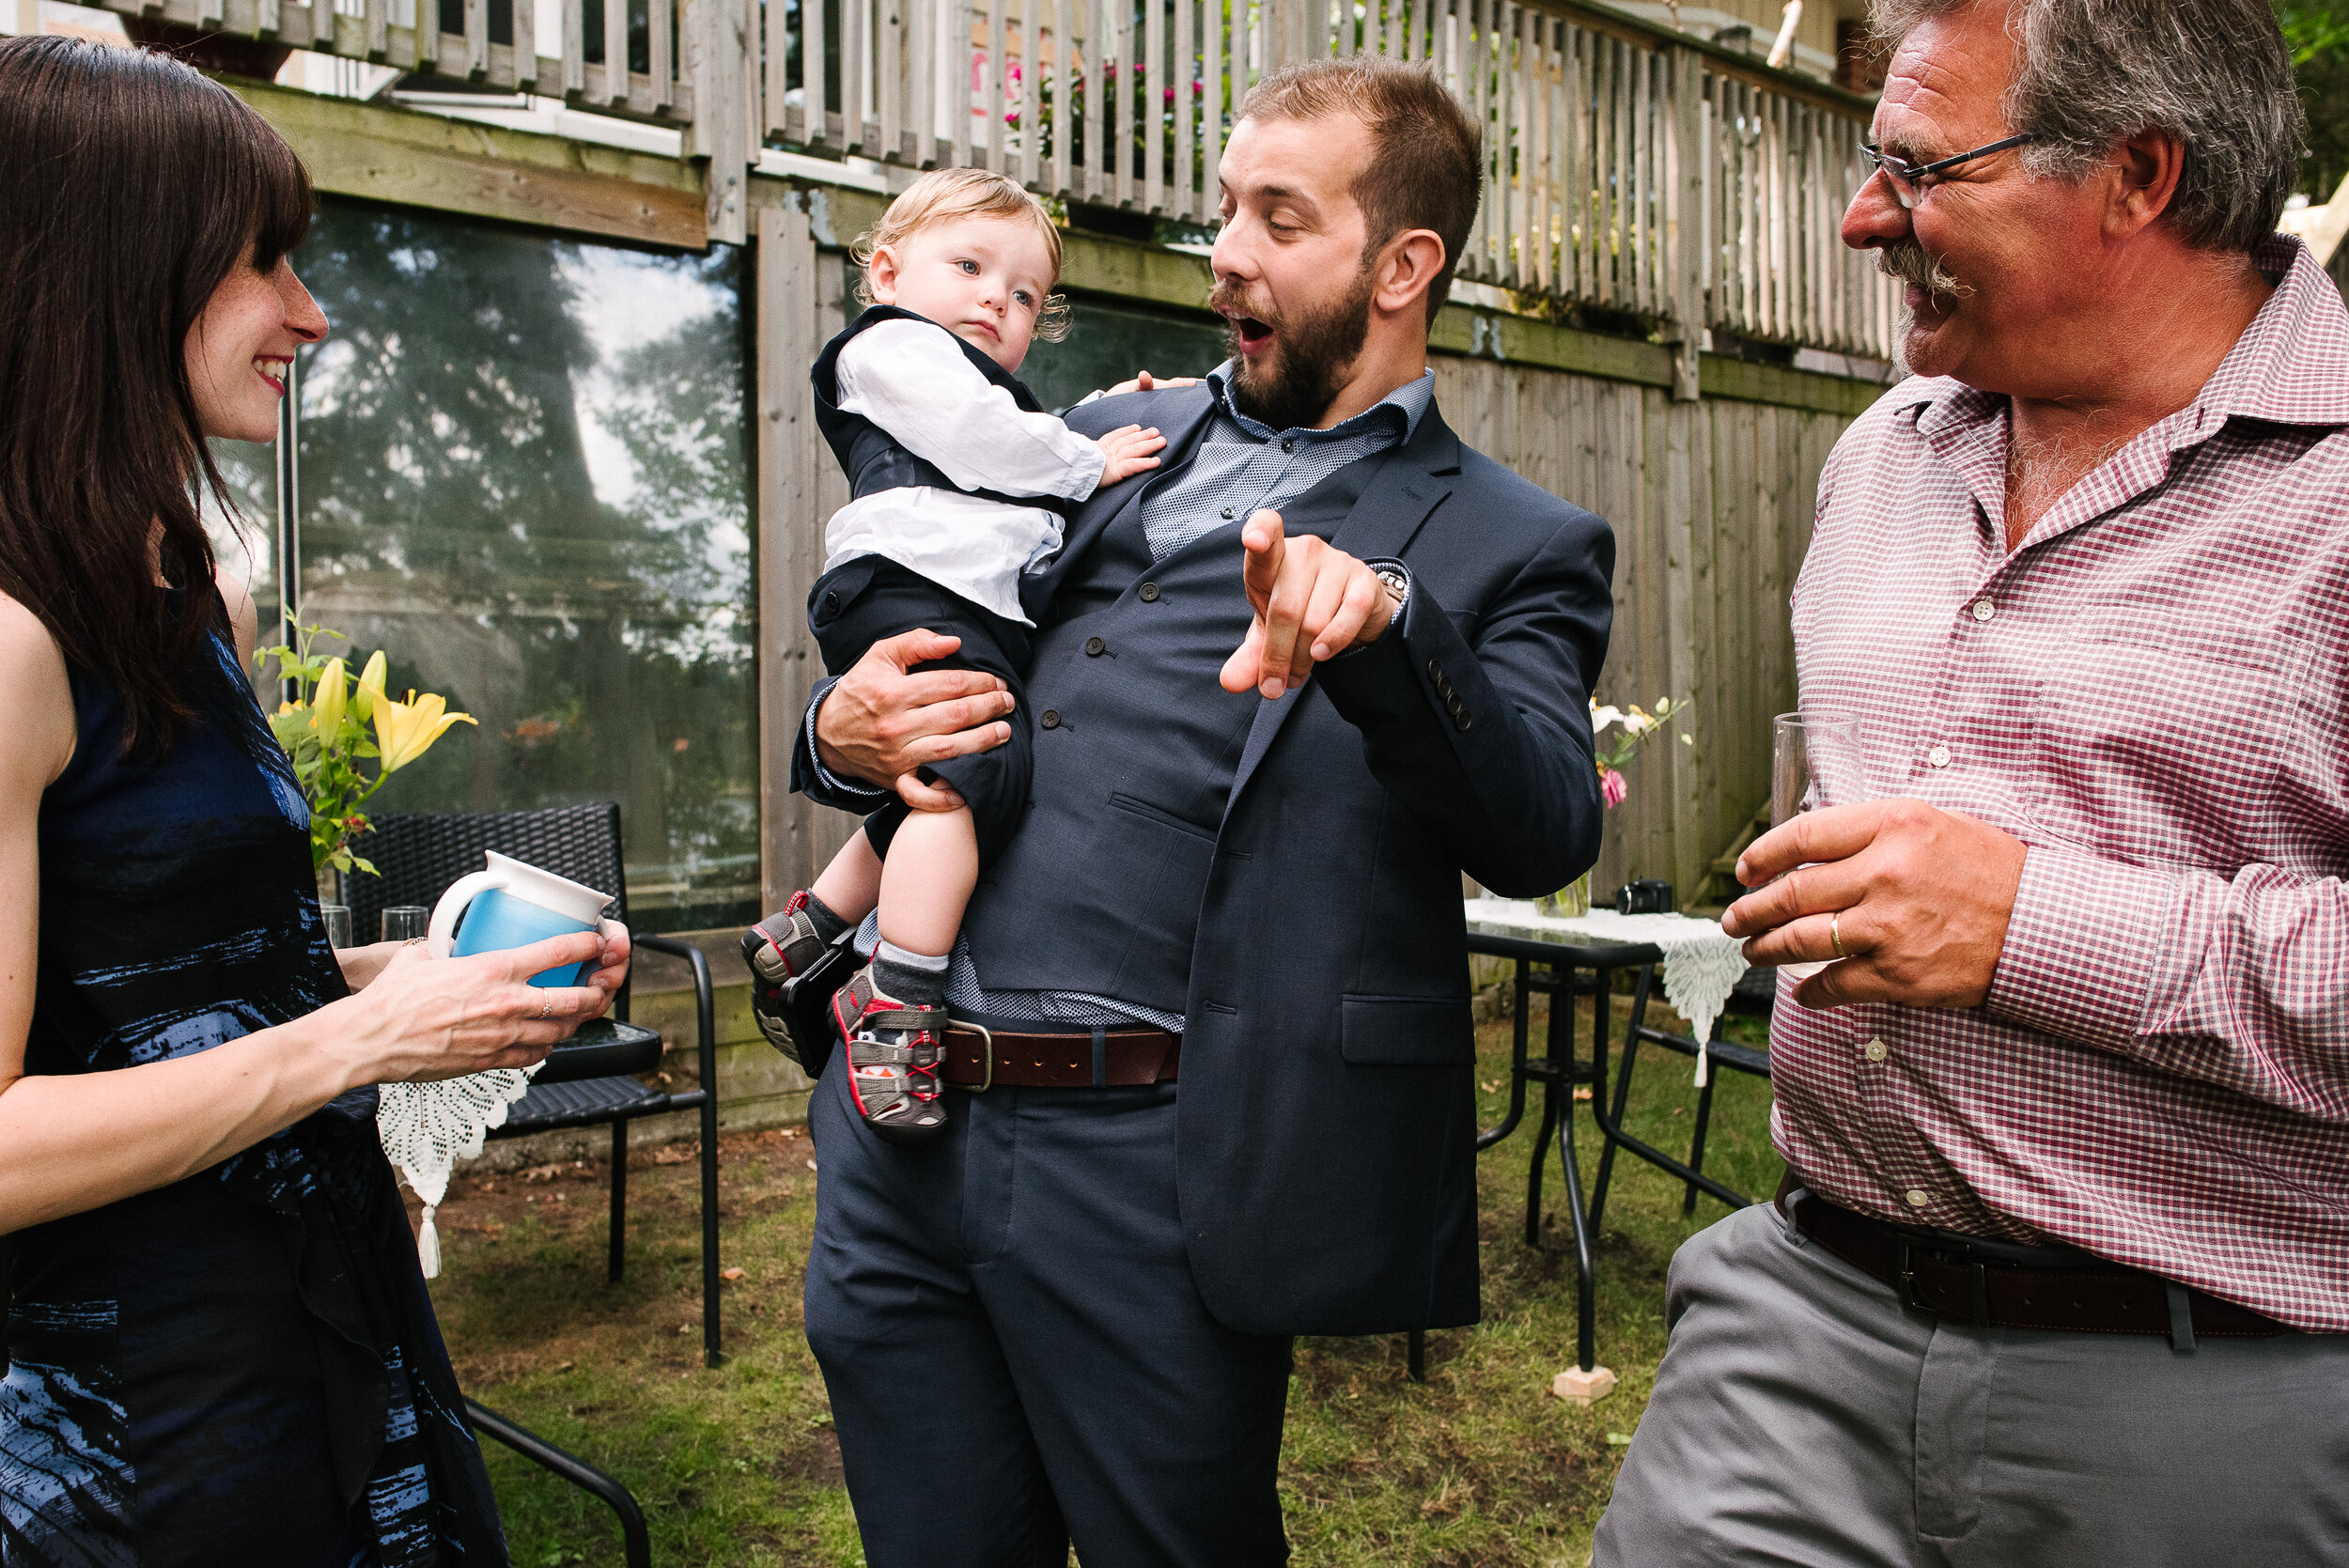 Groom's son and grandson celebrate at their father's wedding in Verona, Ontario